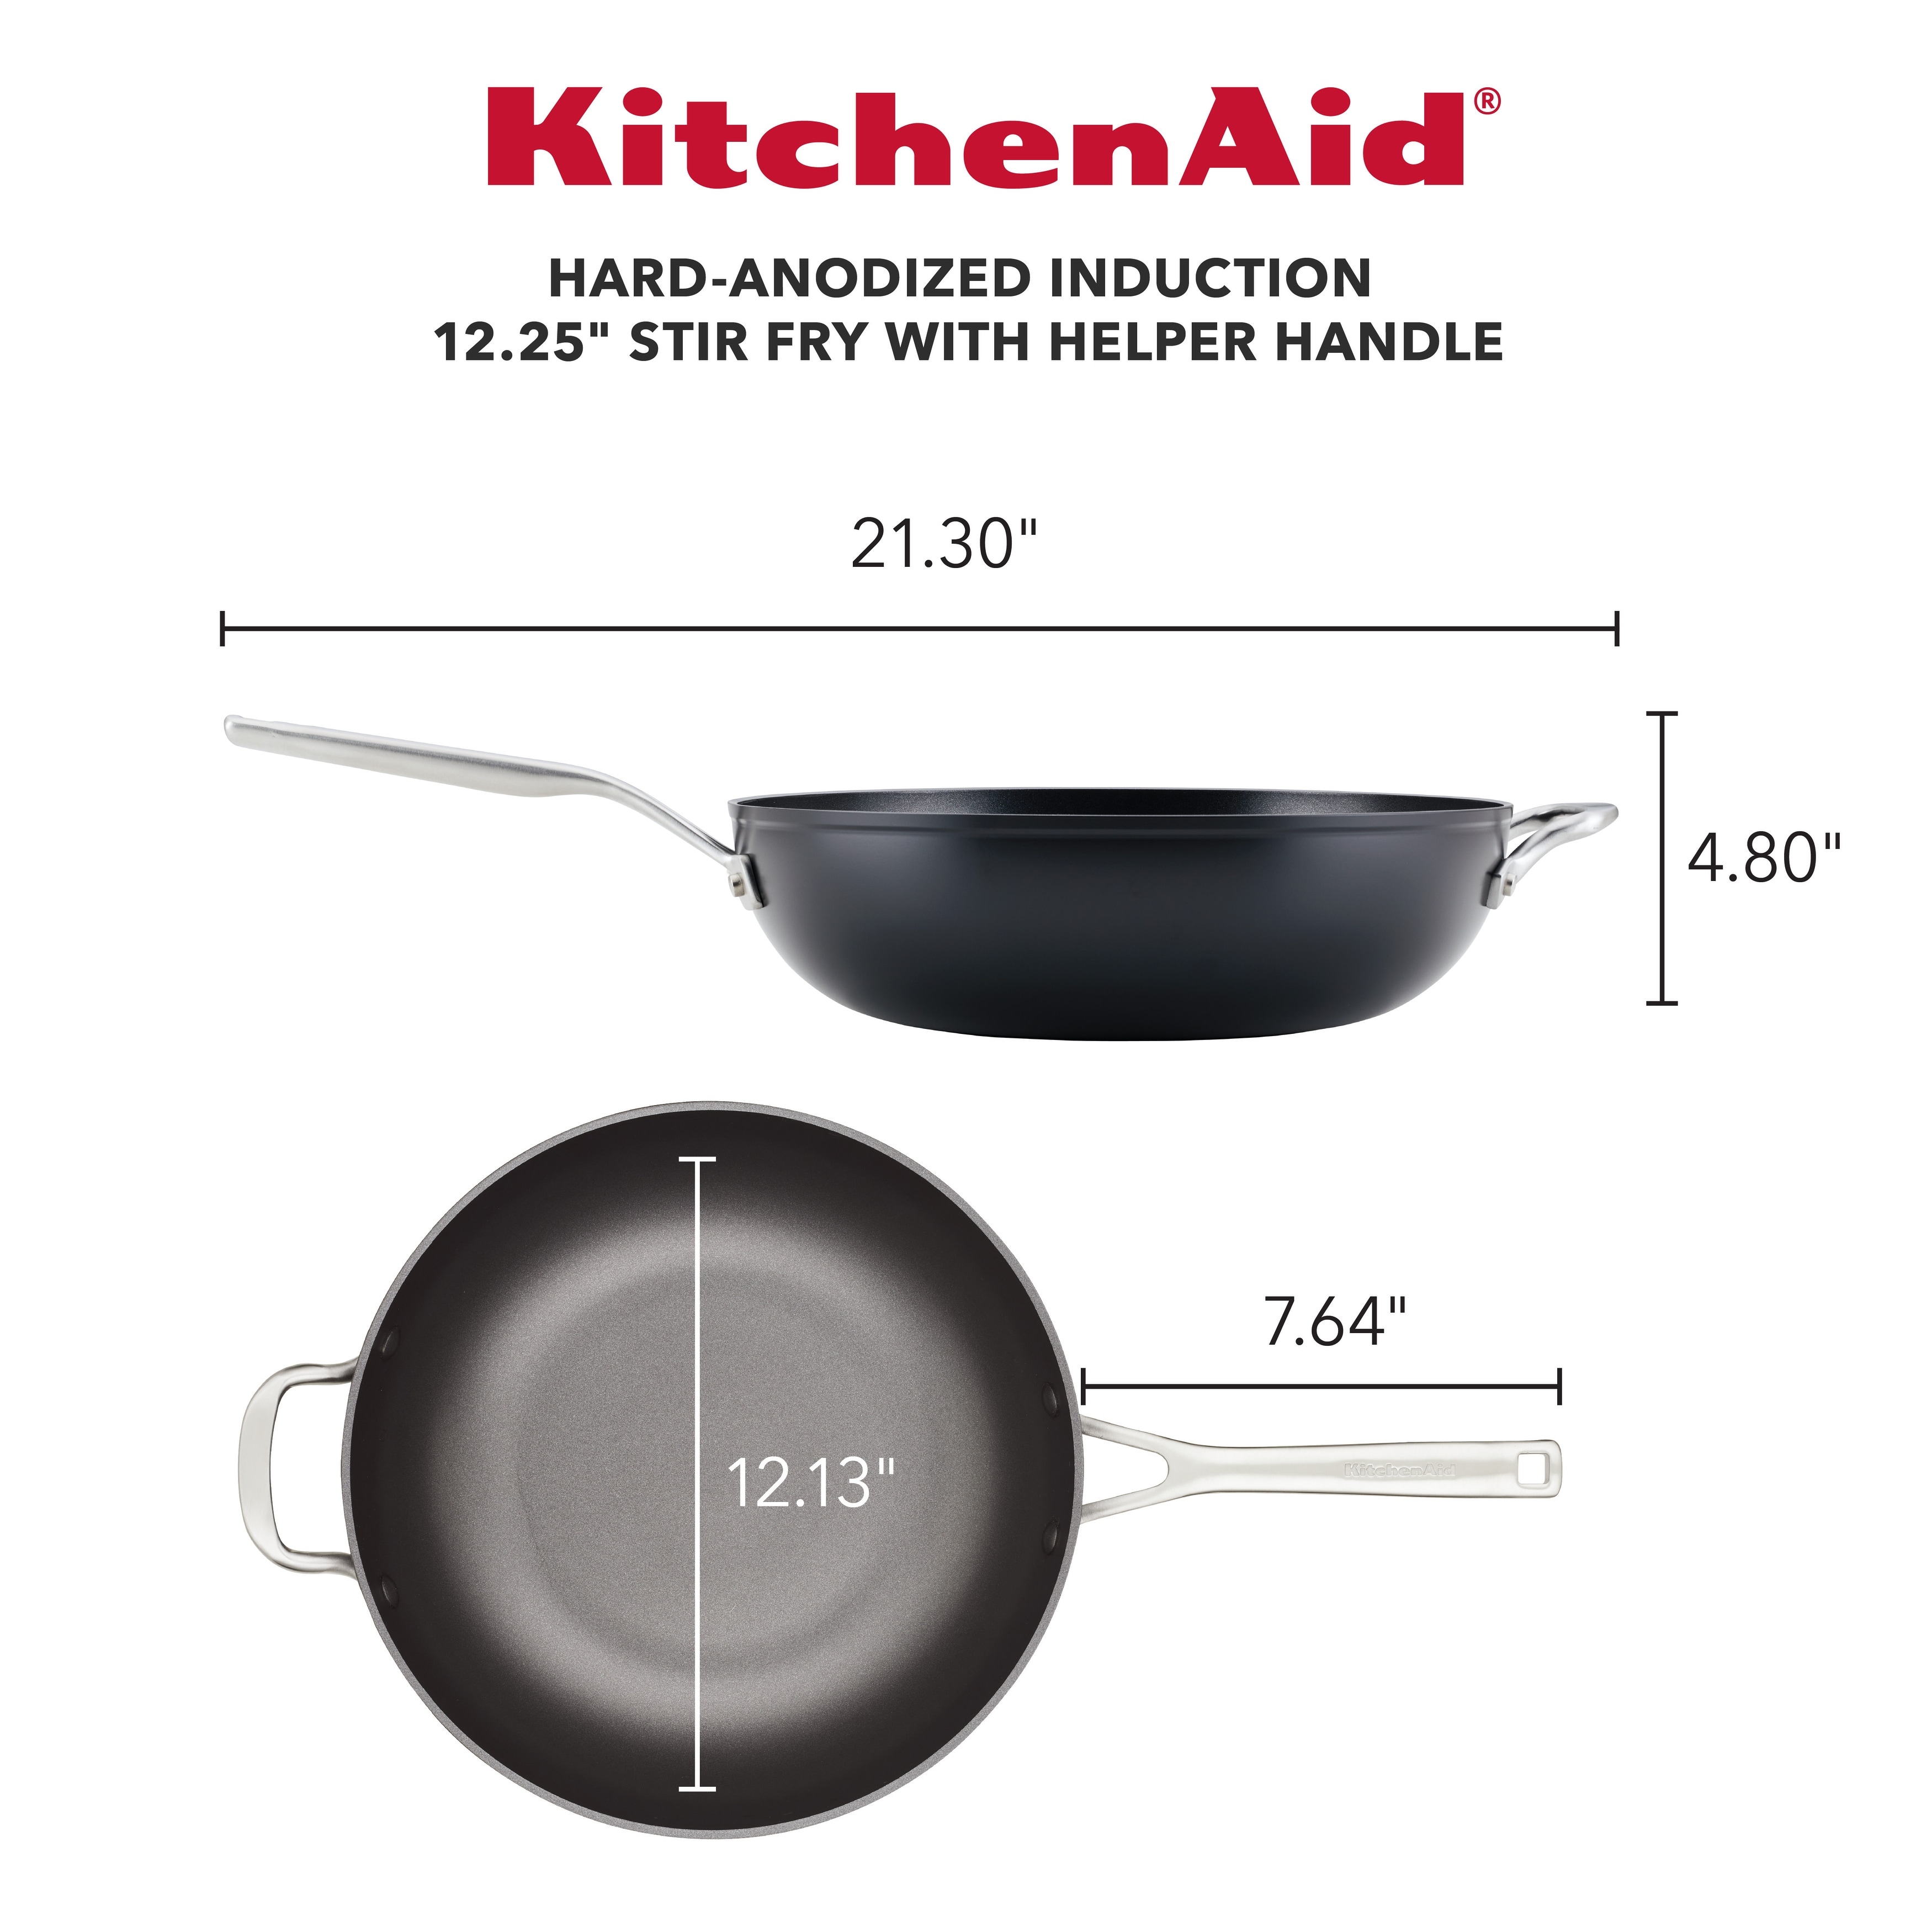 https://ak1.ostkcdn.com/images/products/is/images/direct/054363100671f12b74e680ca0191262ca0386e41/KitchenAid-Hard-Anodized-Induction-Nonstick-Stir-Fry-Pan---Wok-with-Helper-Handle%2C-12.25-Inch%2C-Matte-Black.jpg